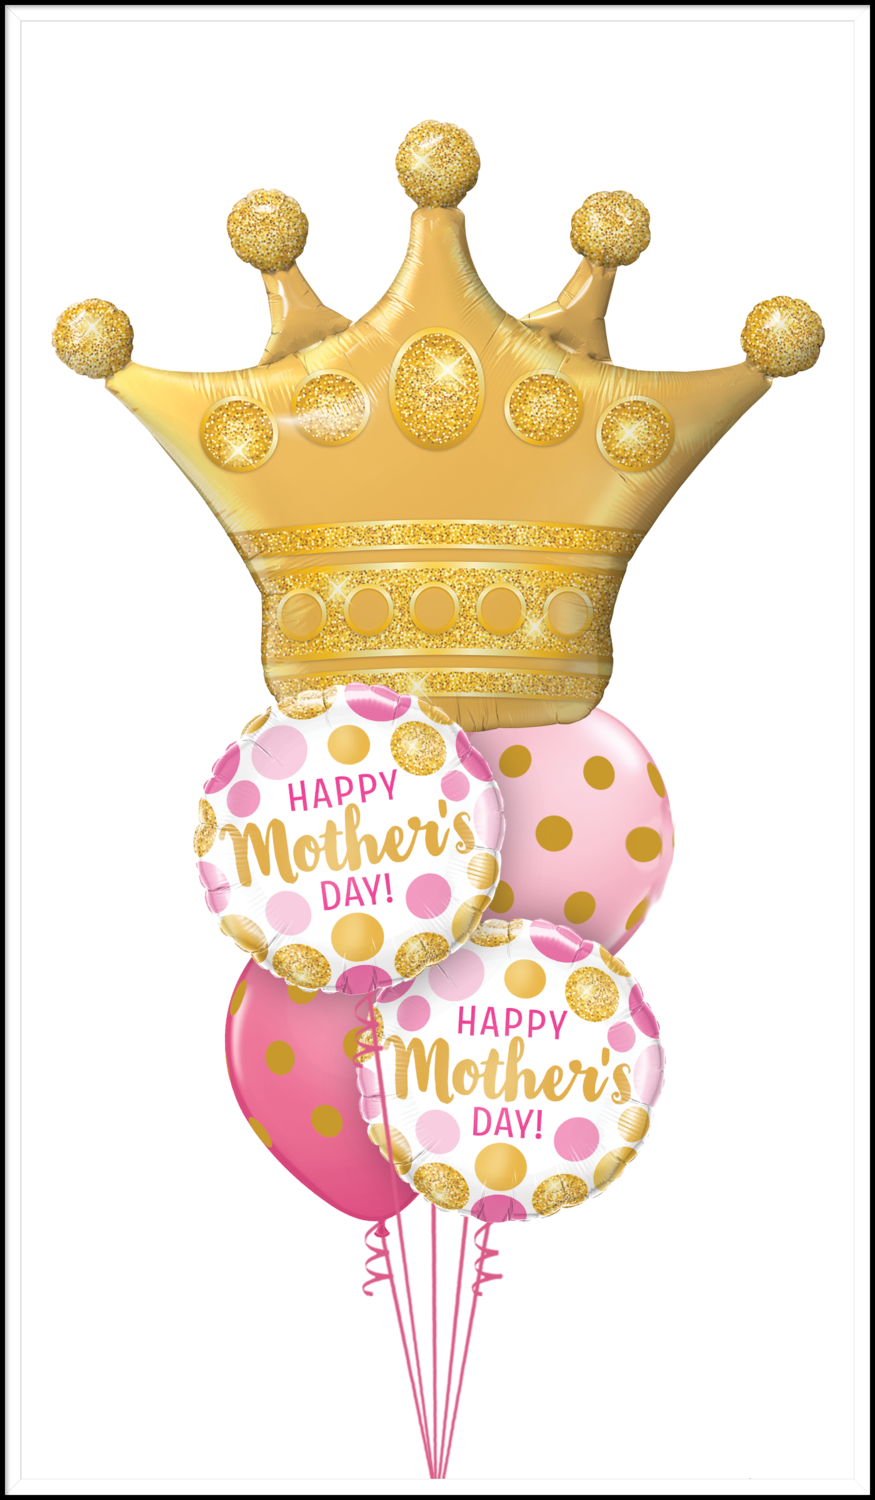 Mothers day Crown balloon bouquet